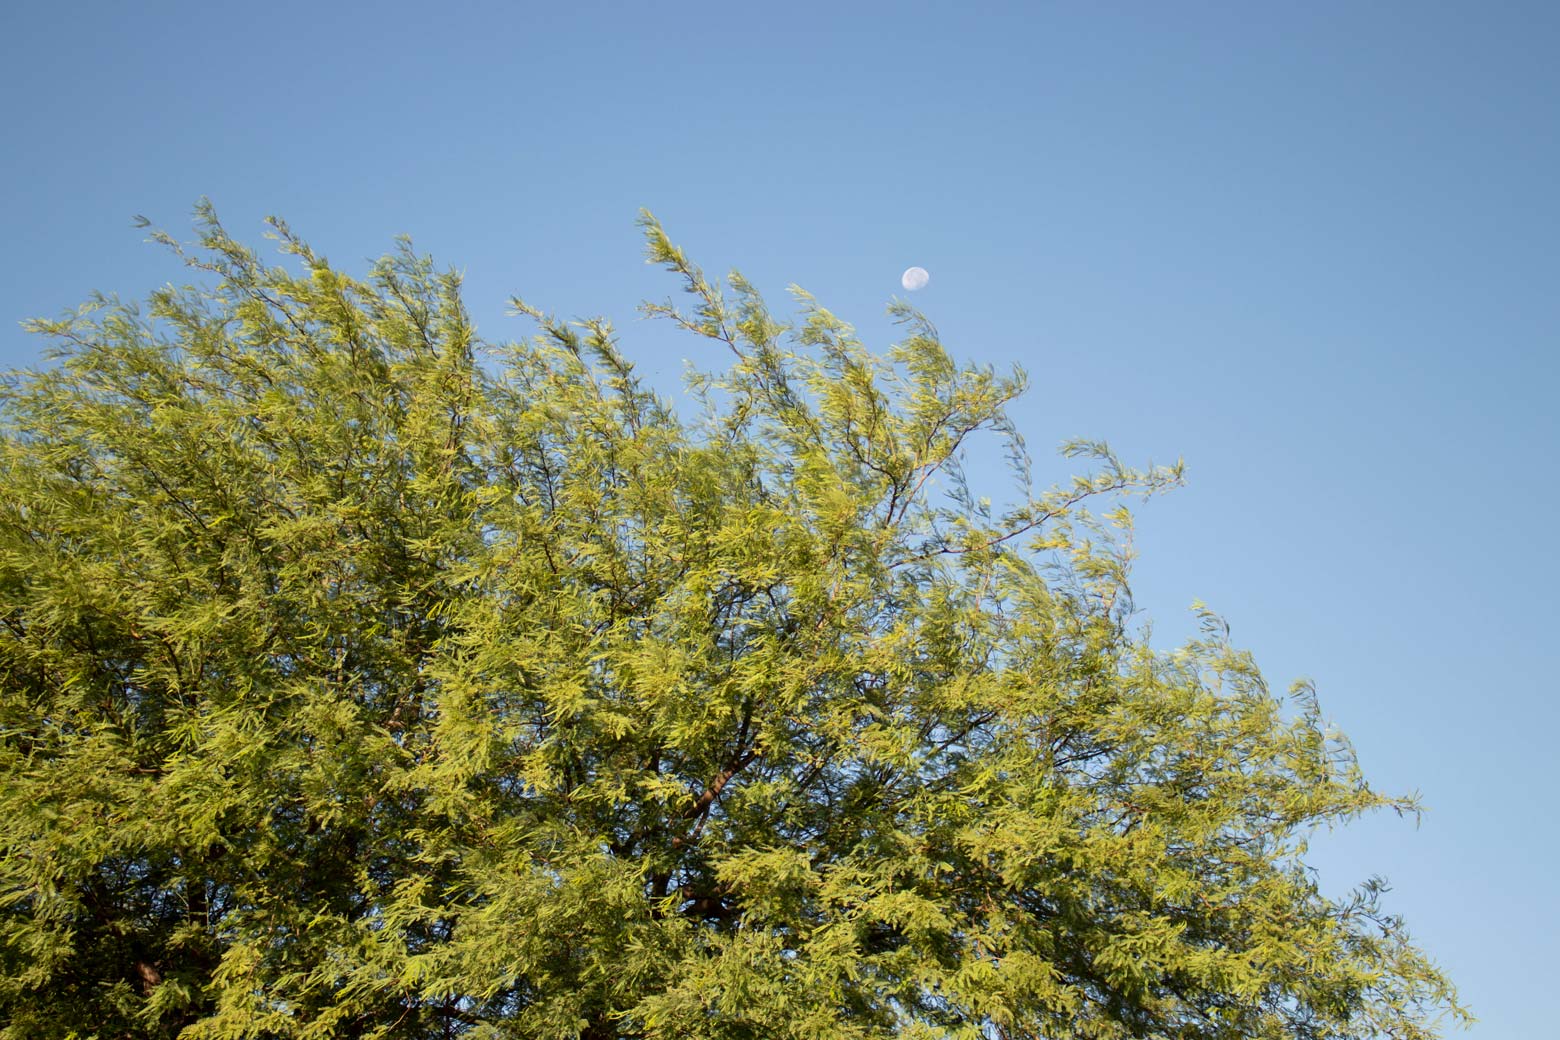 The leaves of a Mesquite tree against a blue sky with a setting moon.